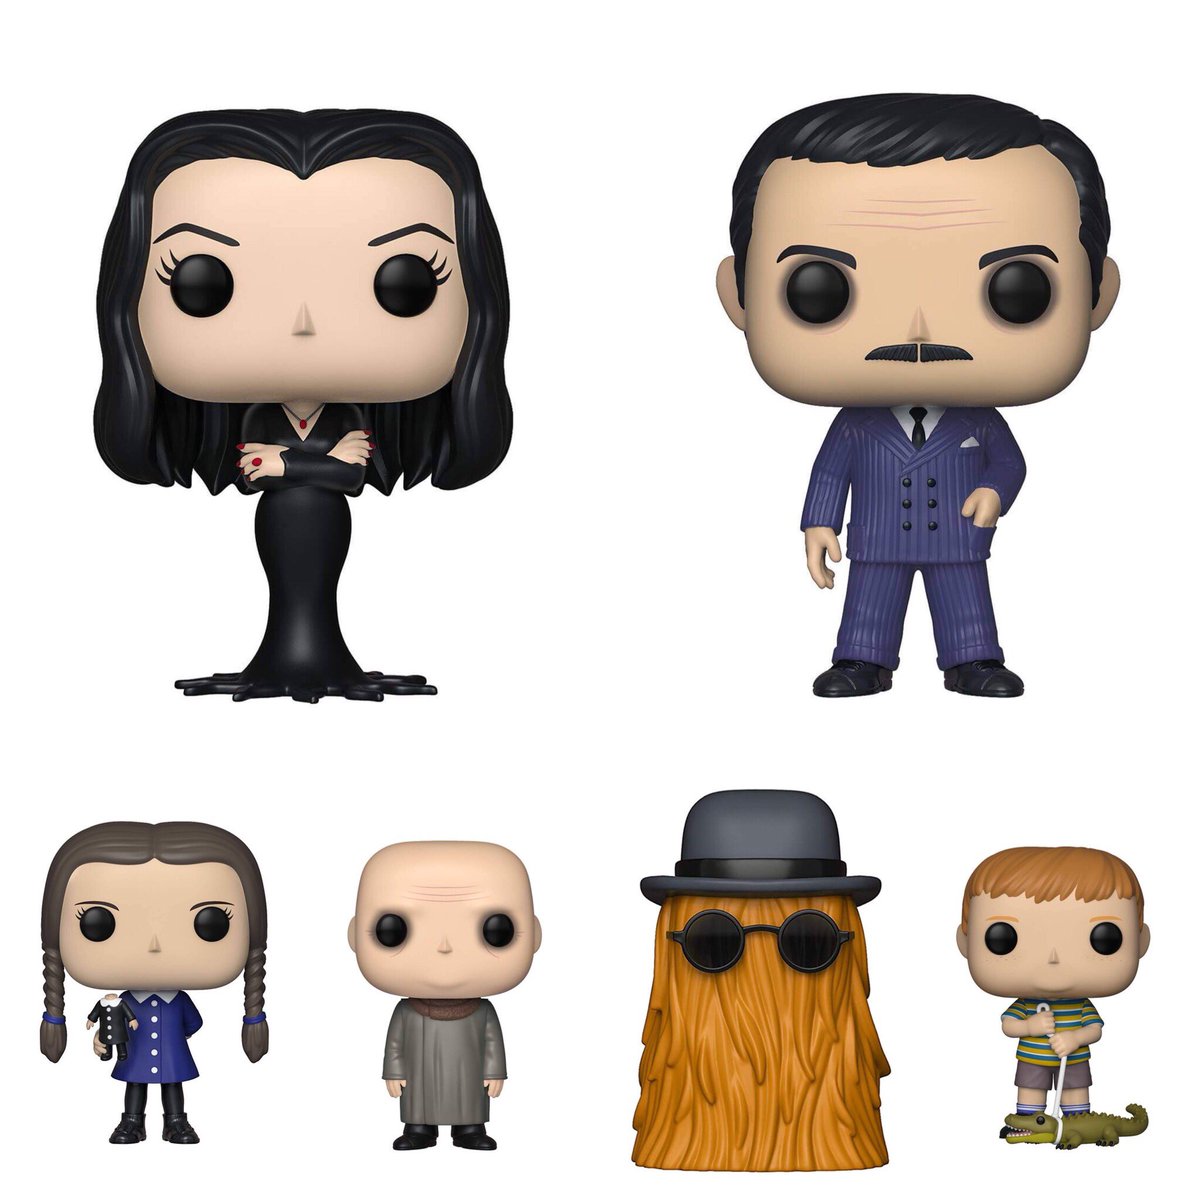 THE ADDAMS FAMILY Funko Figures pre-order: will be released on May 11, 2019...